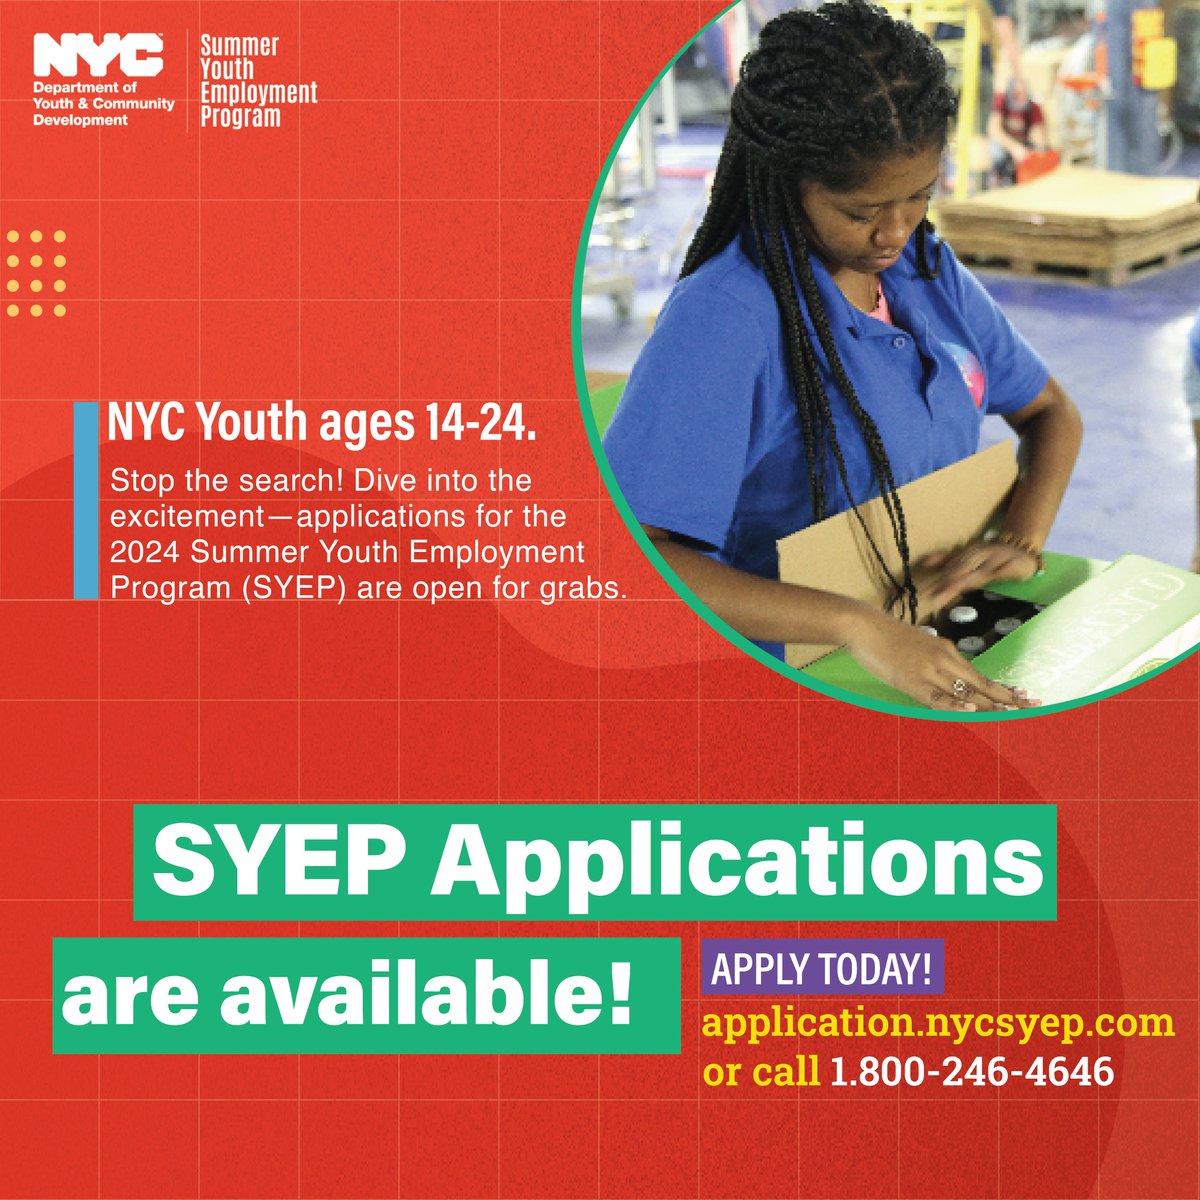 Make money having a summer to remember! 💰 NYC youth ages 14-24 can get paid, hands-on work experience and career exploration all summer long through the Summer Youth Employment Program. The application is only open through March 1. Apply today: application.nycsyep.com